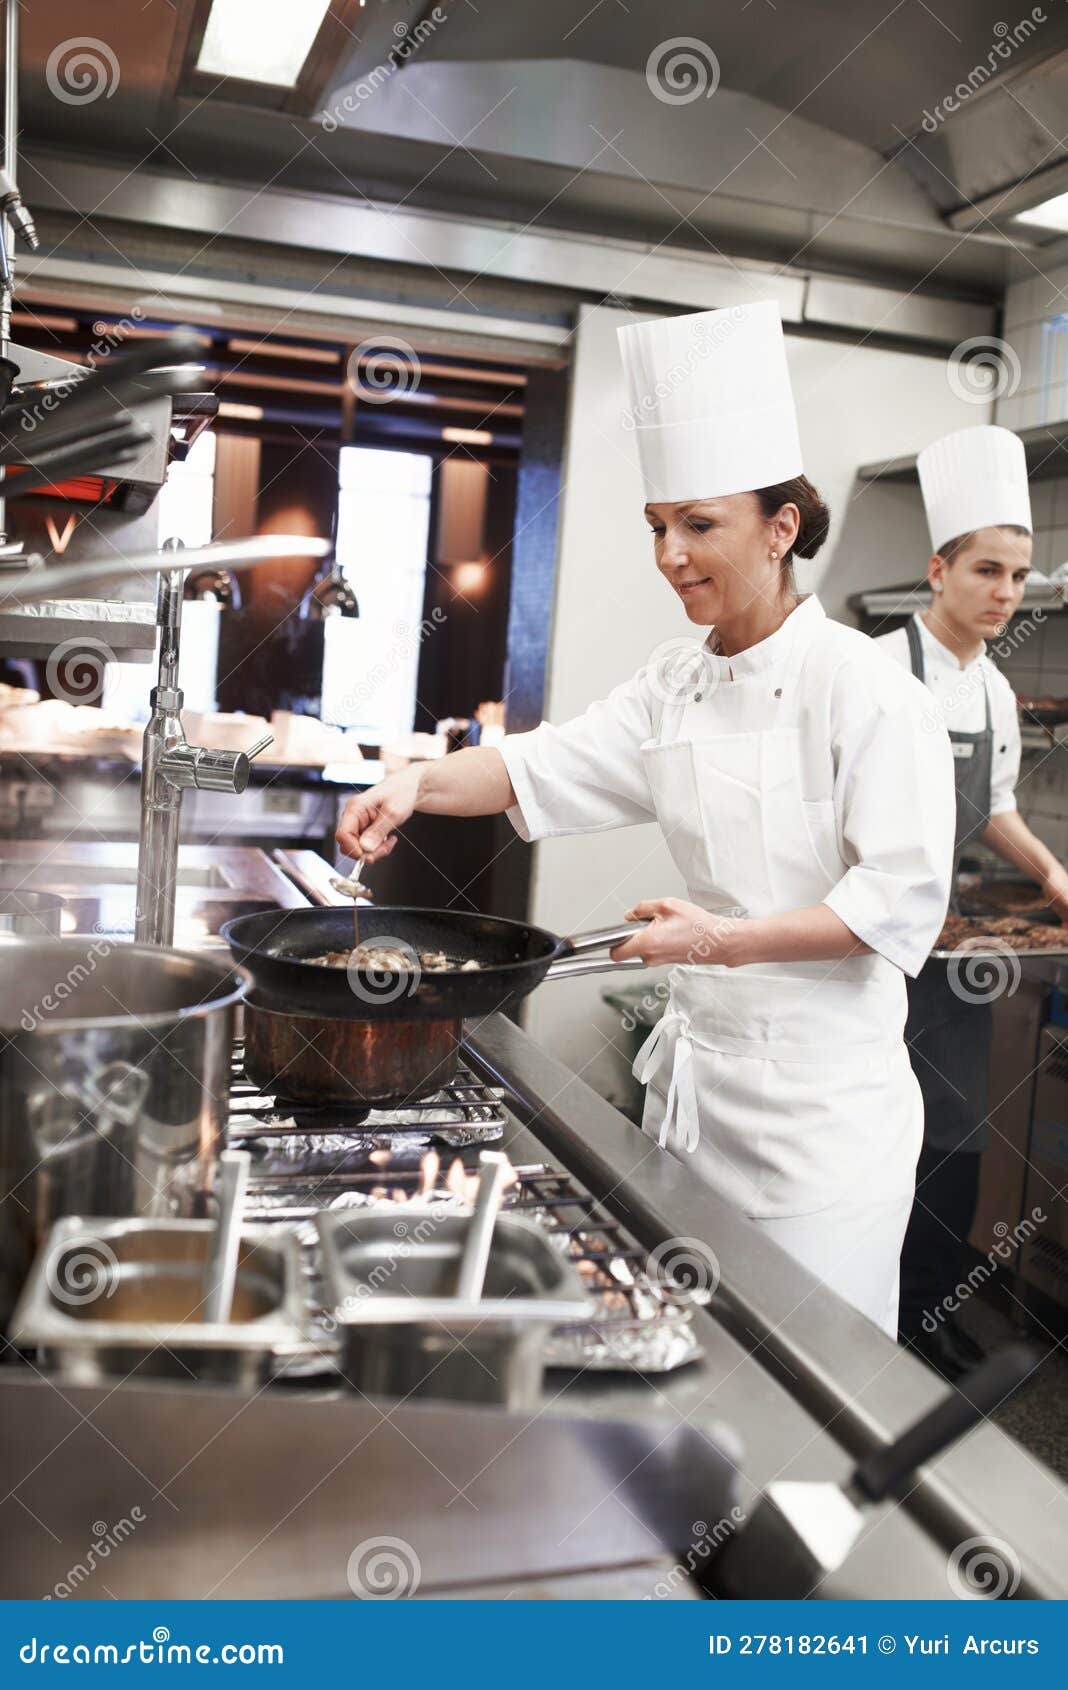 chef, woman and frying pan with sauce in kitchen, catering service and prepare food for restaurant fine dining